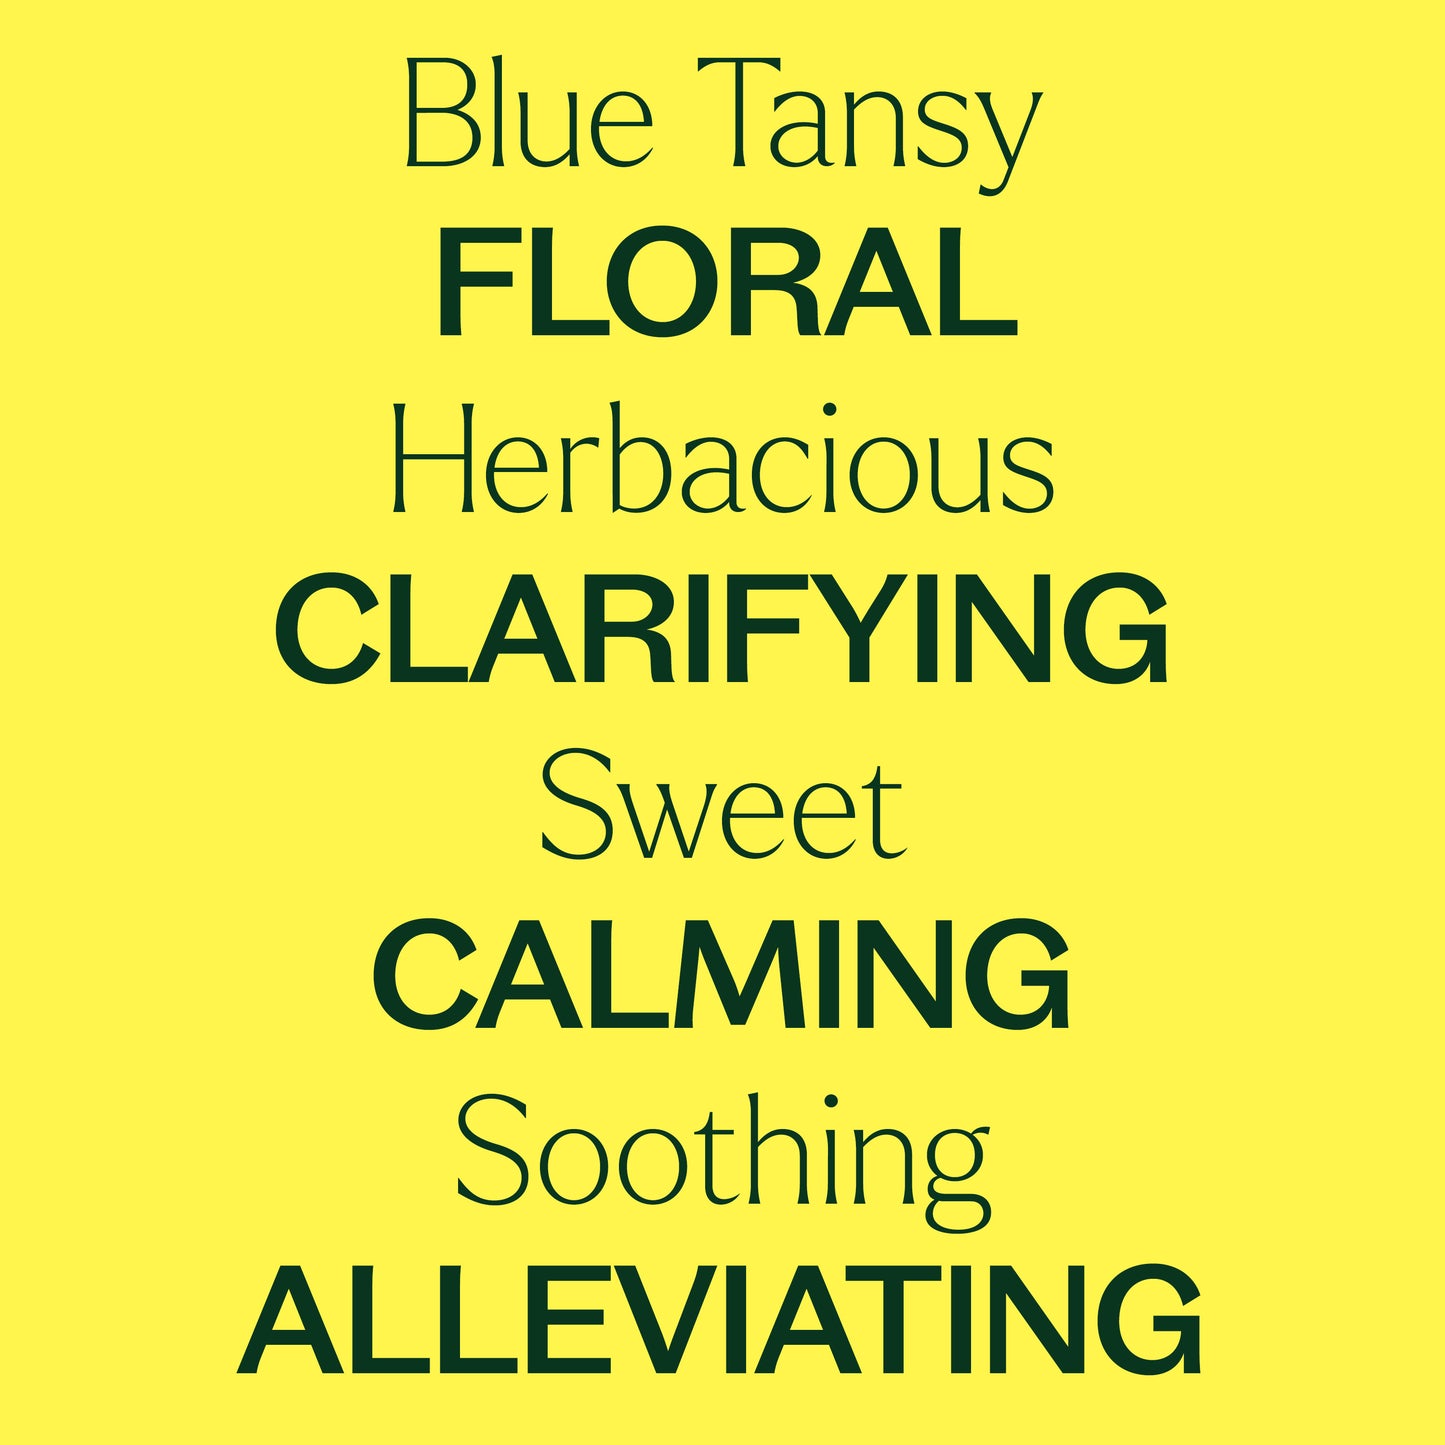 Blue Tansy Essential Oil key features. Floral, herbacious, clarifying, sweet, calming, soothing, alleviating